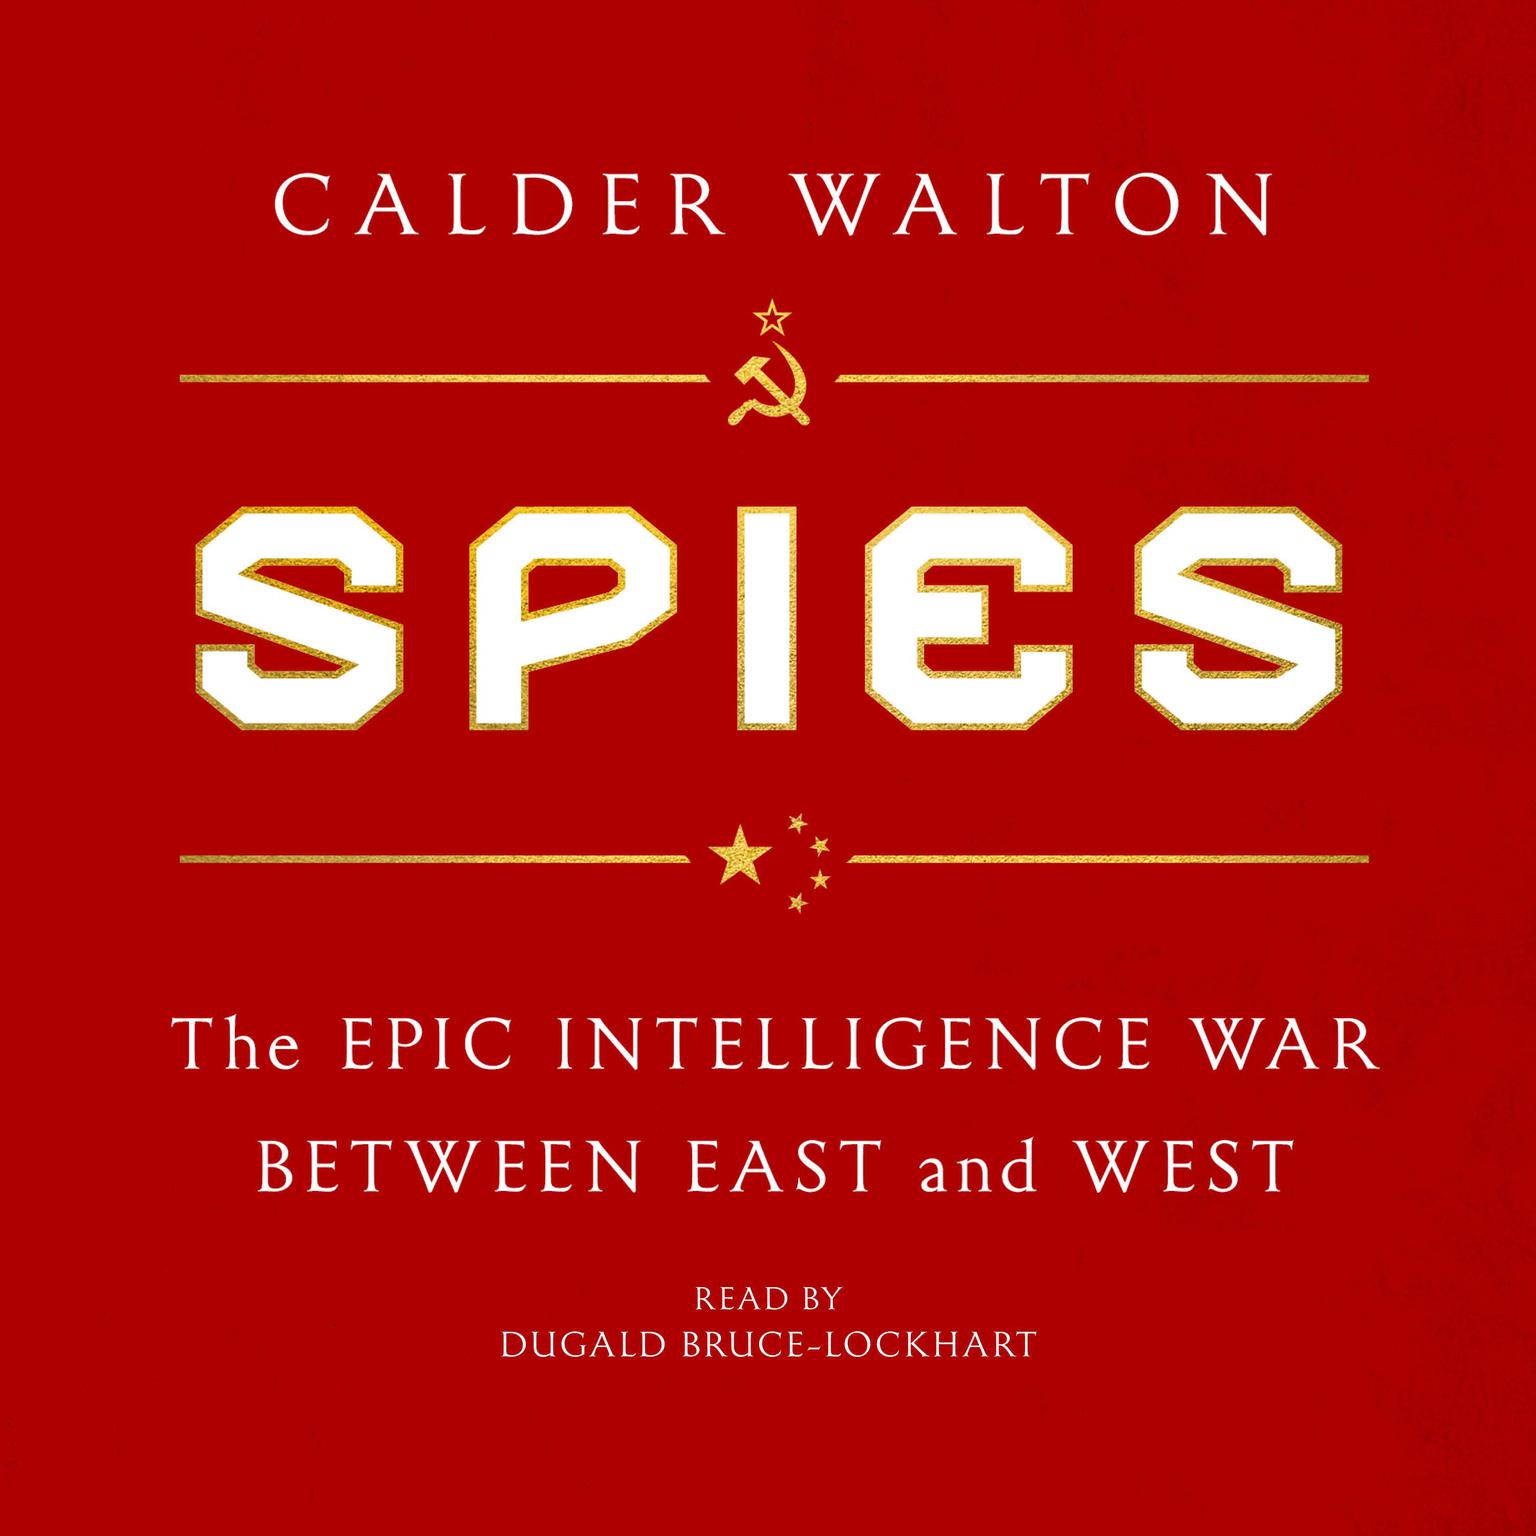 Spies: The Epic Intelligence War Between East and West Audiobook, by Calder Walton